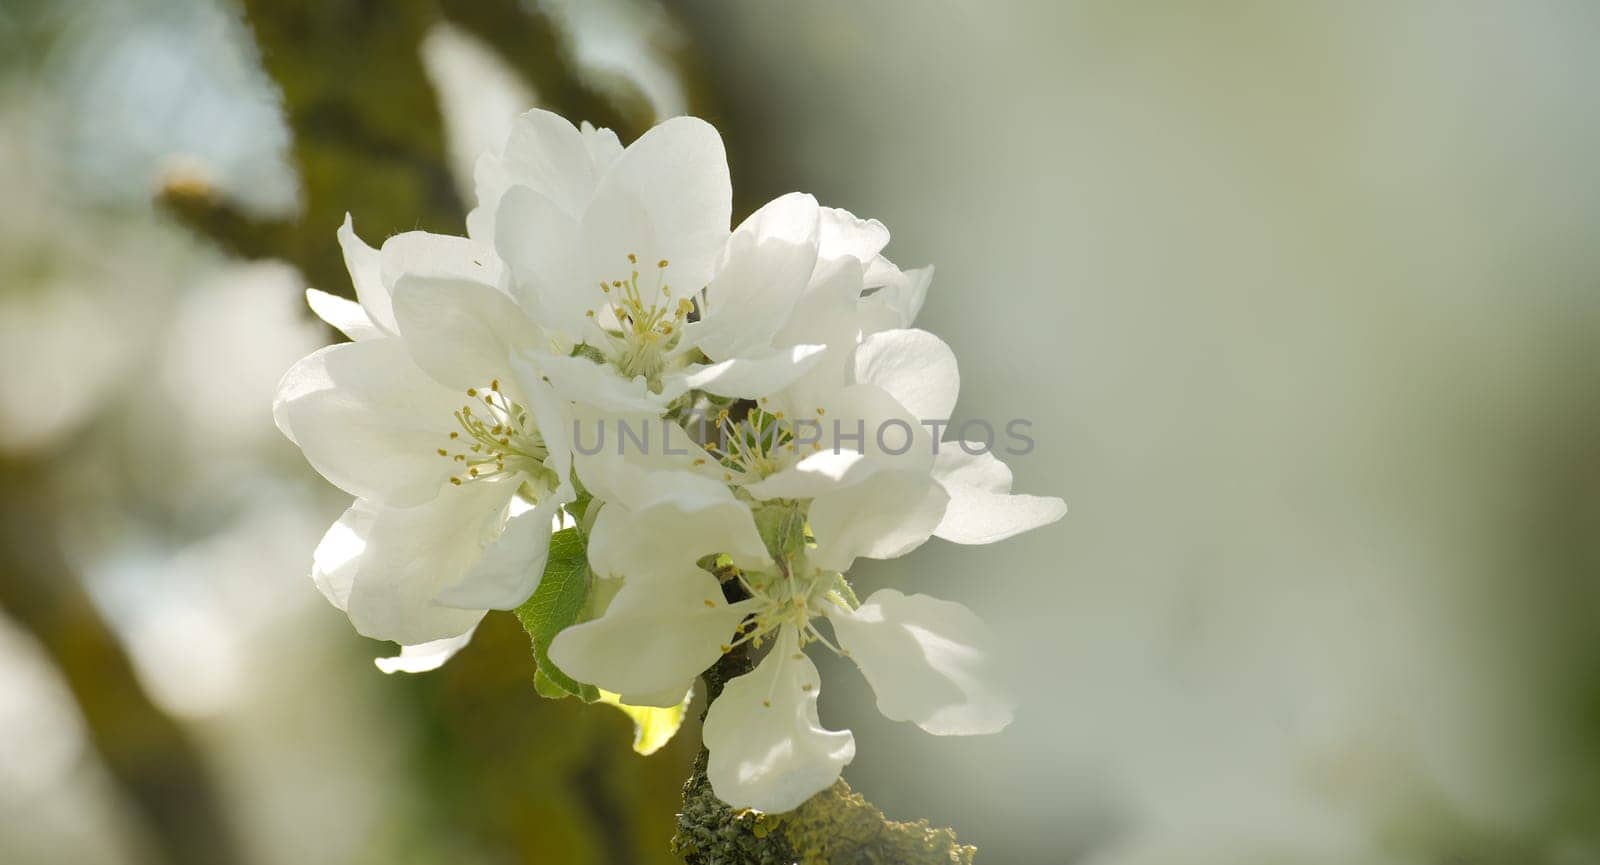 Cluster of white apple tree blossoms with delicate petals in various stages of bloom, background is blurred with hints of light green and a grey-to-white gradient